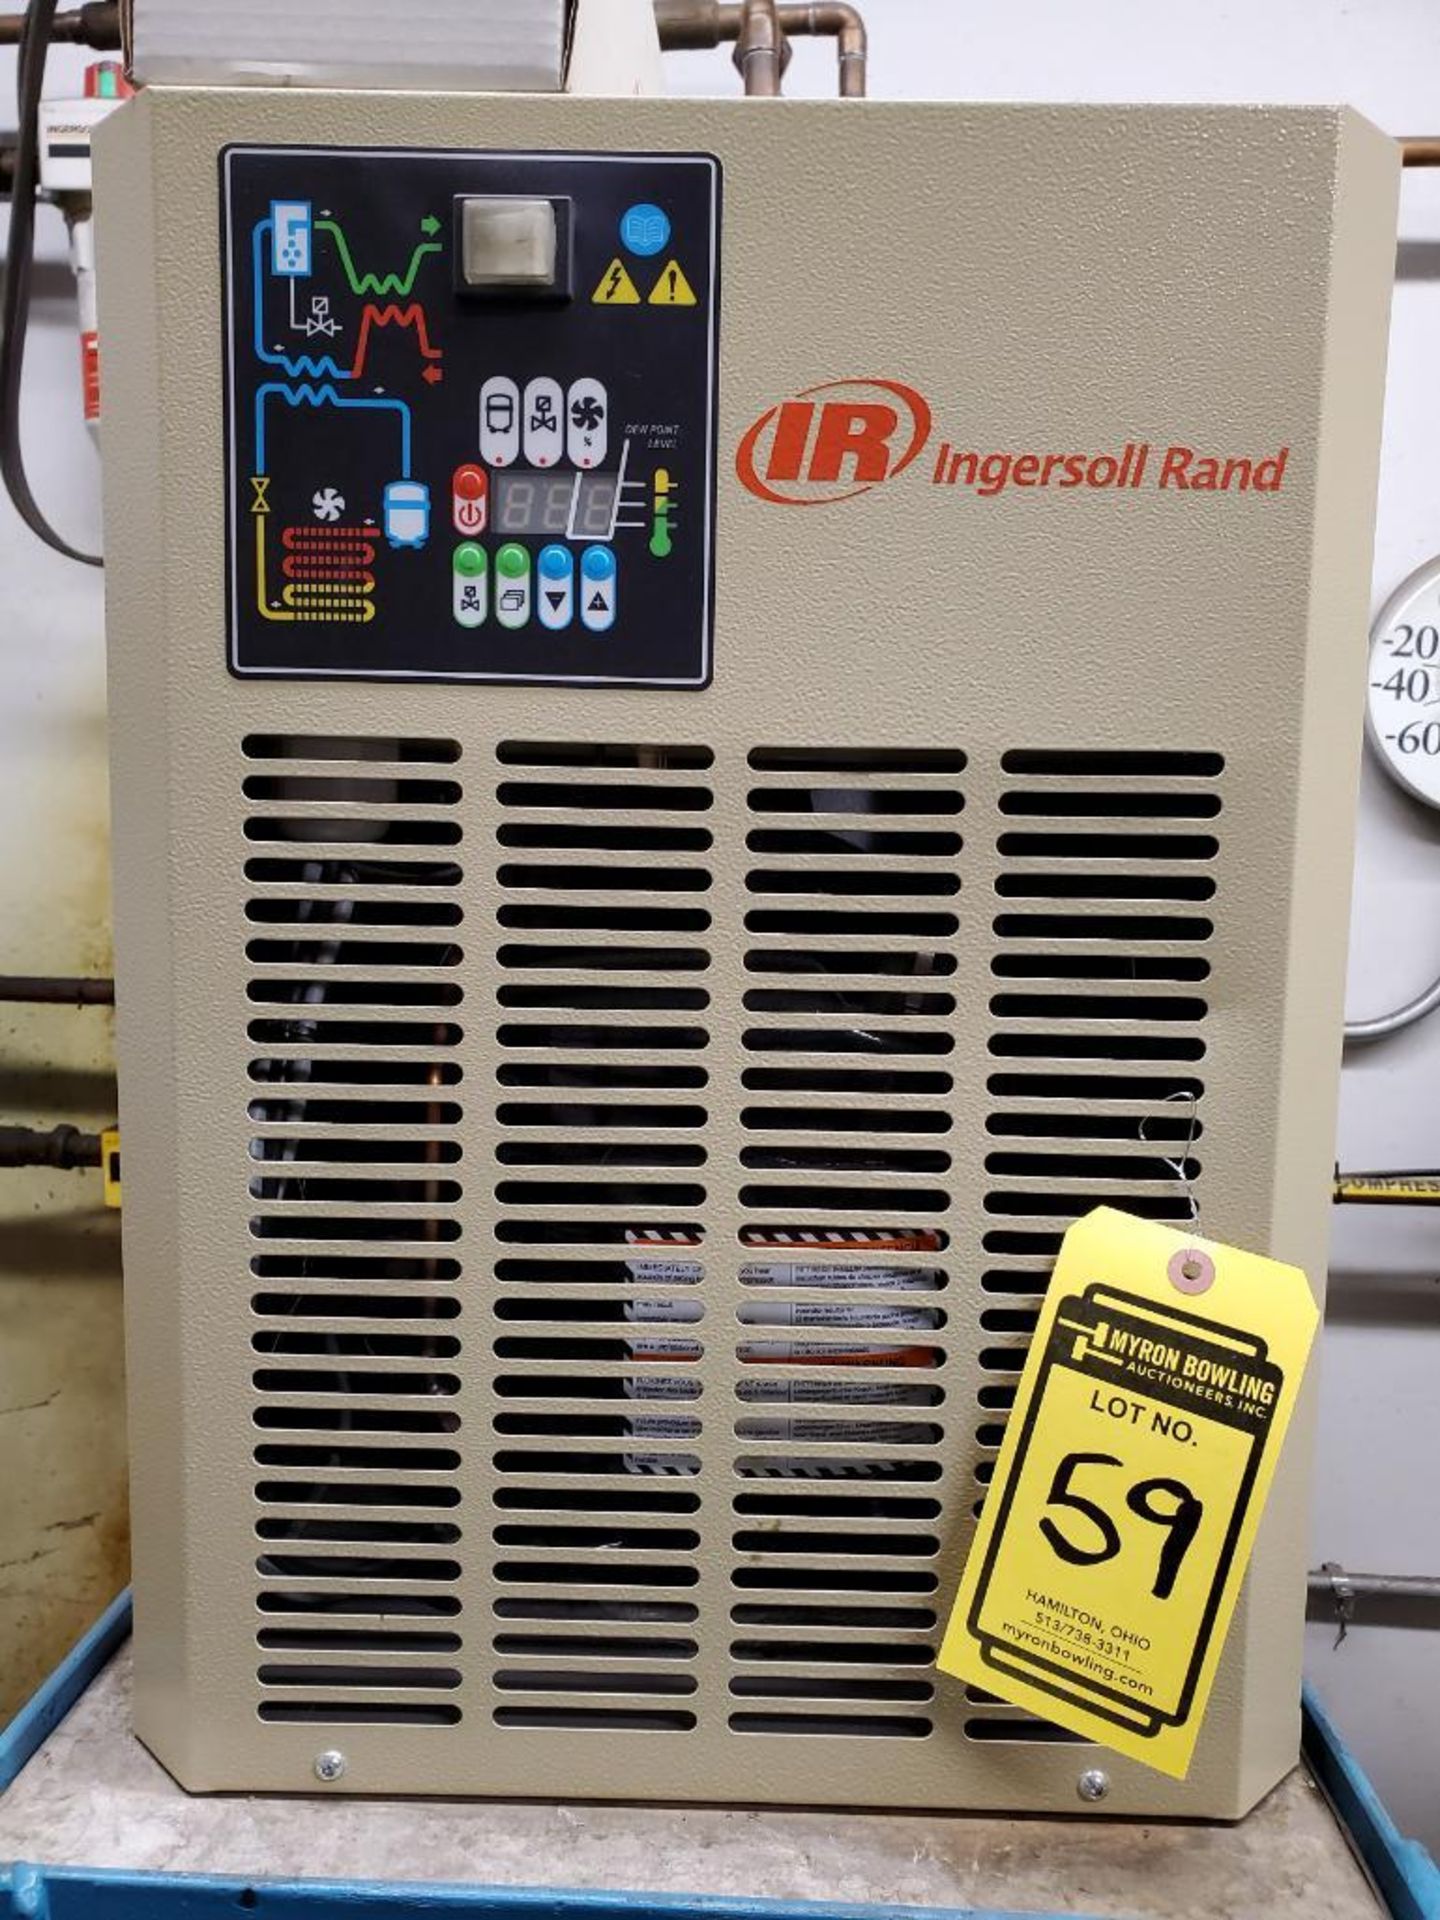 INGERSOLL-RAND REFRIGERATED AIR DRYER, MODEL D180IN, R134A REFRIGERANT, 106 CRM - Image 4 of 4